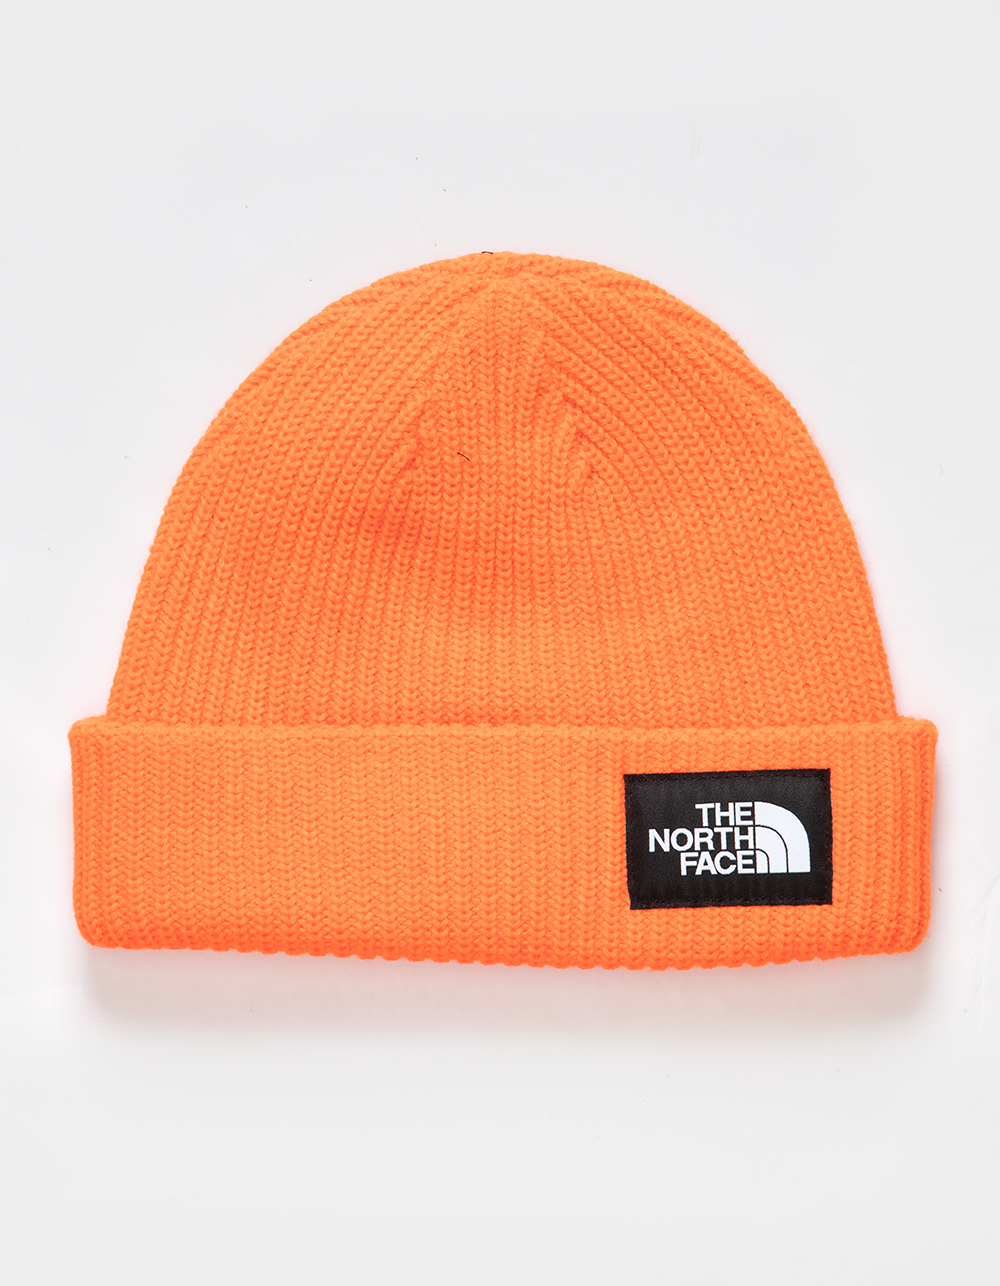 THE NORTH FACE Salty Beanie